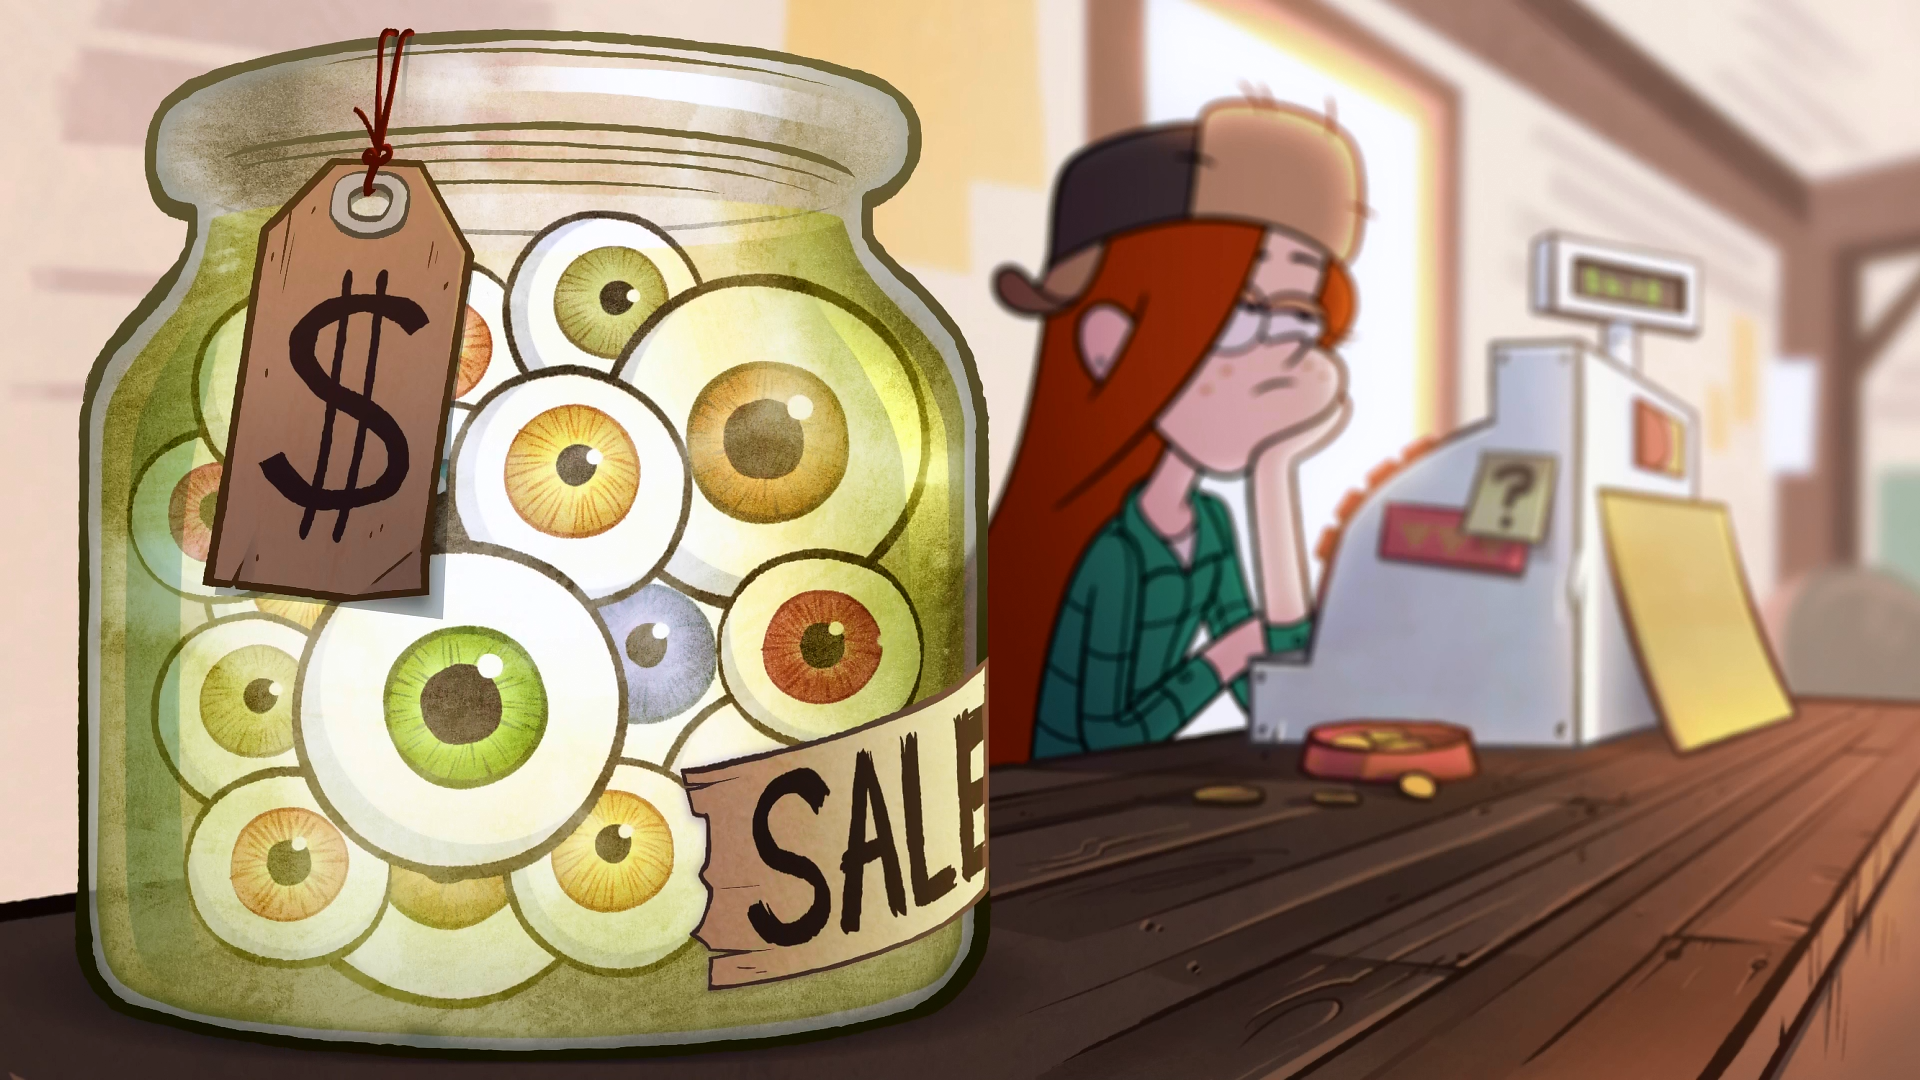 Disney Channel Presents Gravity Falls Ot Awesome New Animated Show